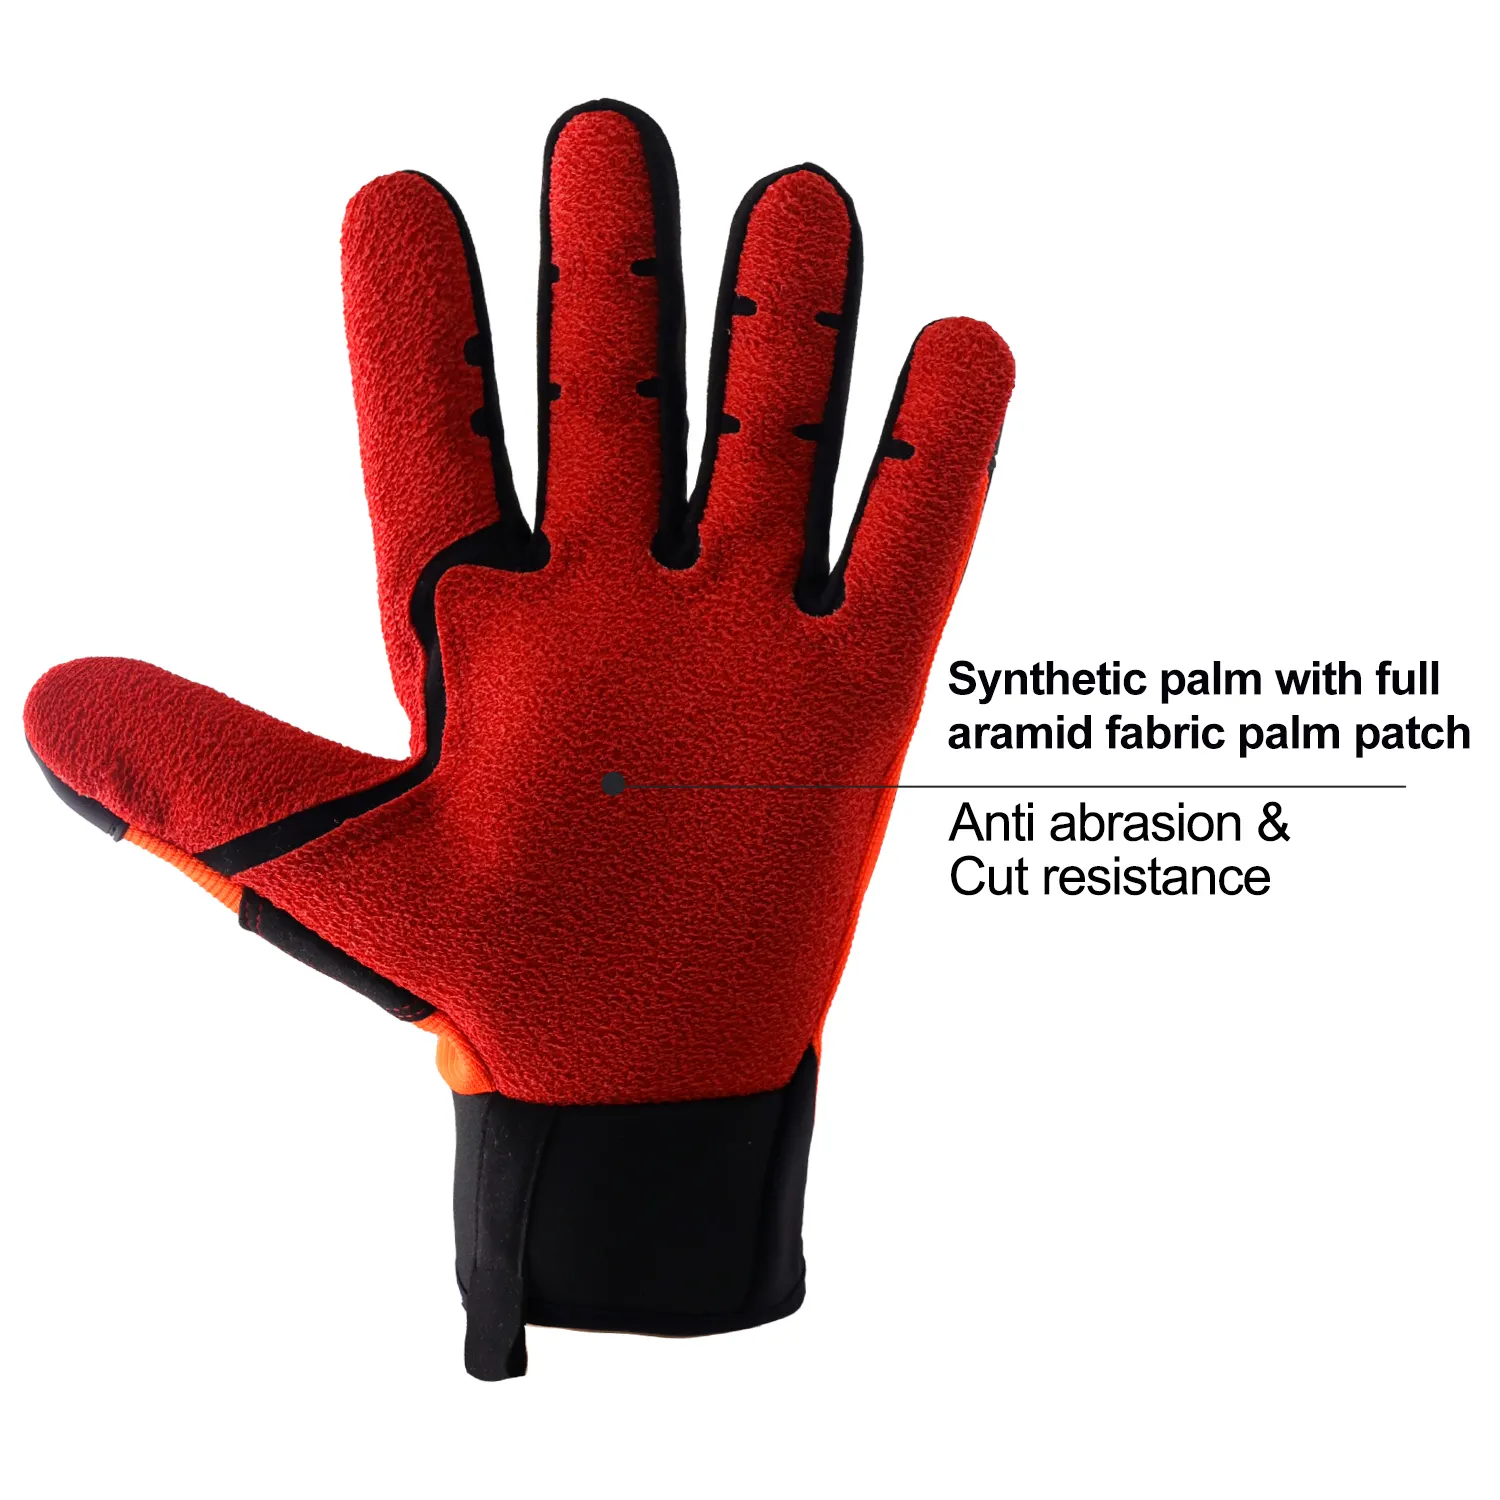 Resistance Cut Gloves Handlandy Soft Heavy Duty Oil And Gas Impact Anti Abrasion Cut Resistant Working Hand Logo Mechanic Safety Gloves